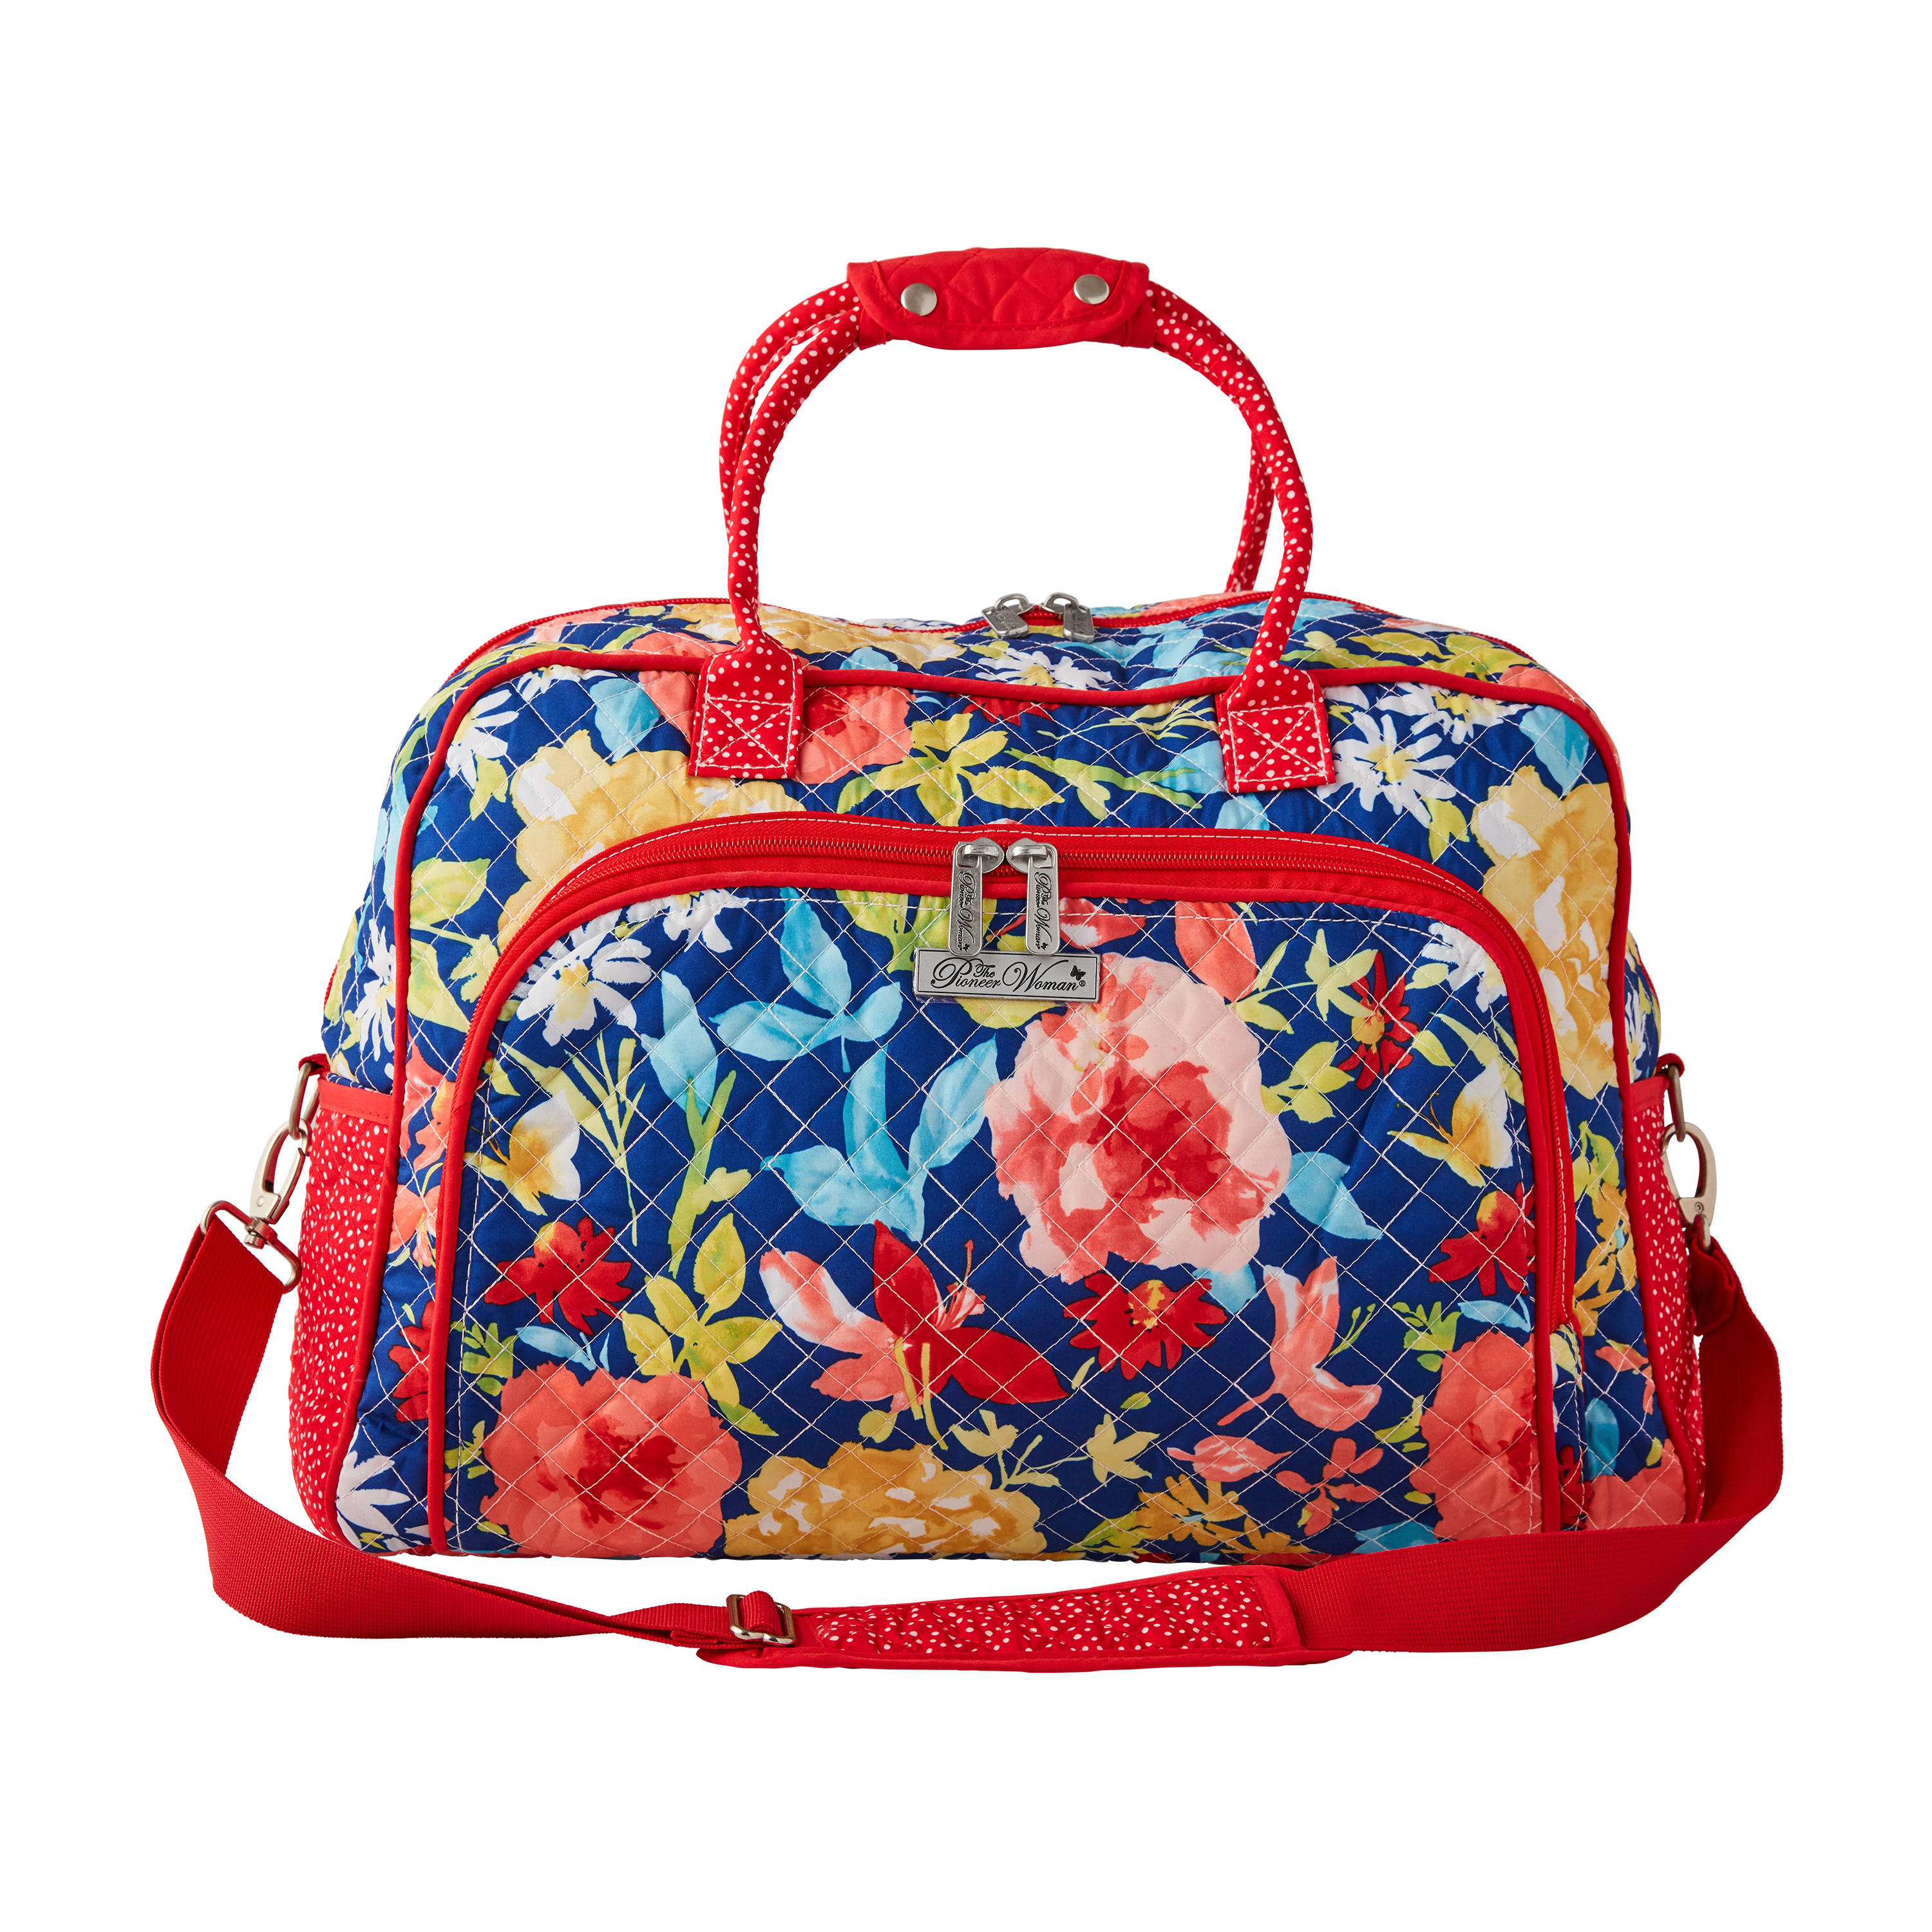 The Pioneer Woman Fiona Fabric Weekender Bag, Multicolor, 1 Piece - image 1 of 5